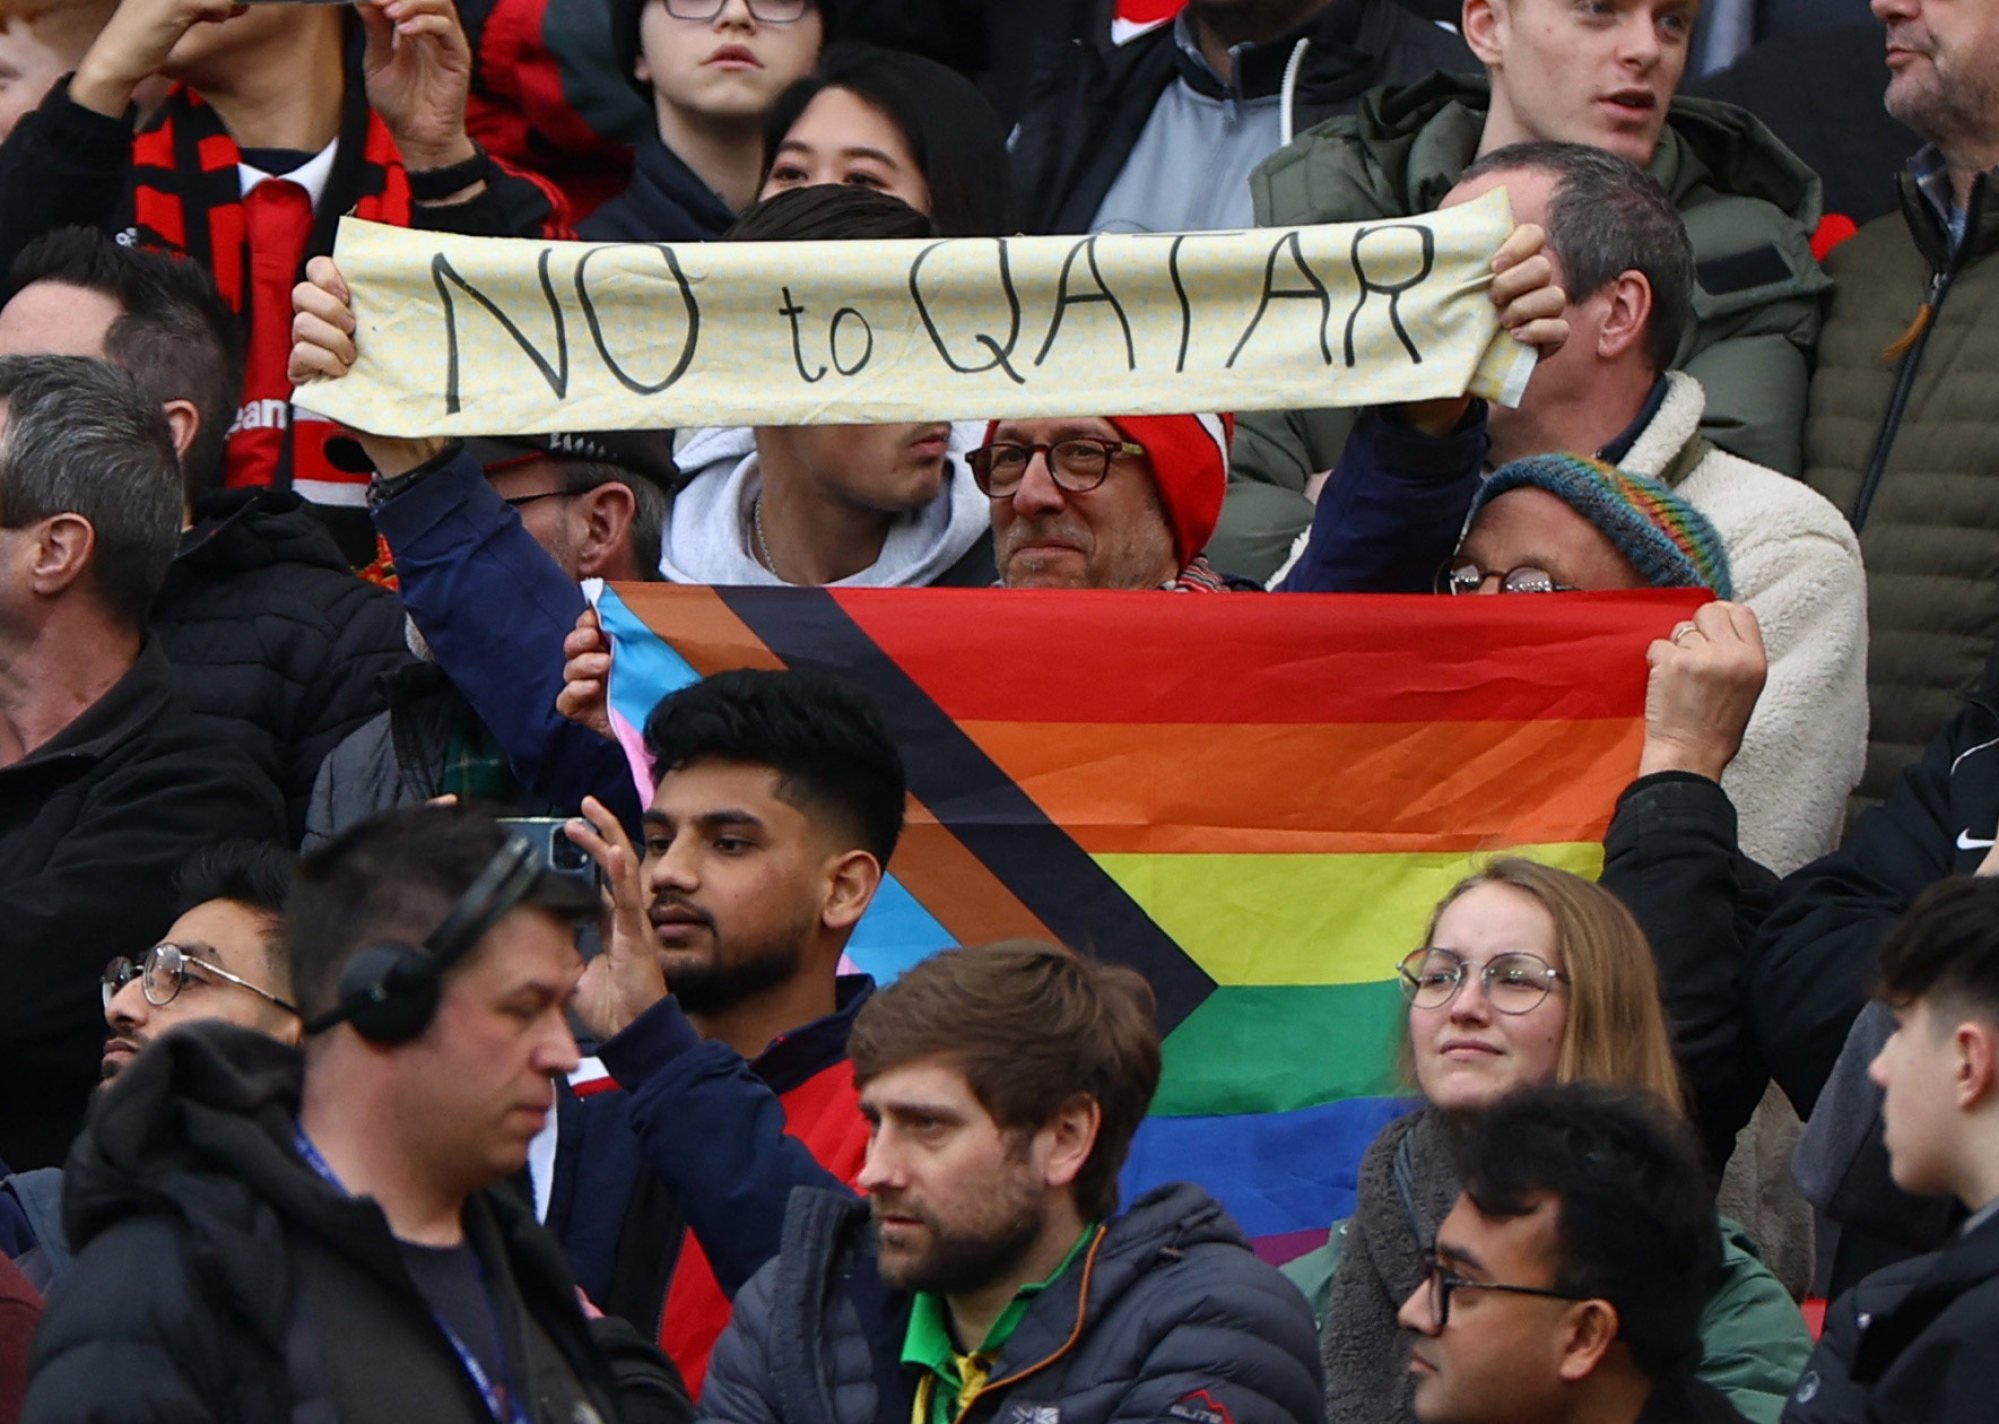 Manchester United fans hold up a ‘No to Qatar’ sign and LGBT flag. Photo: Reuters/FIle